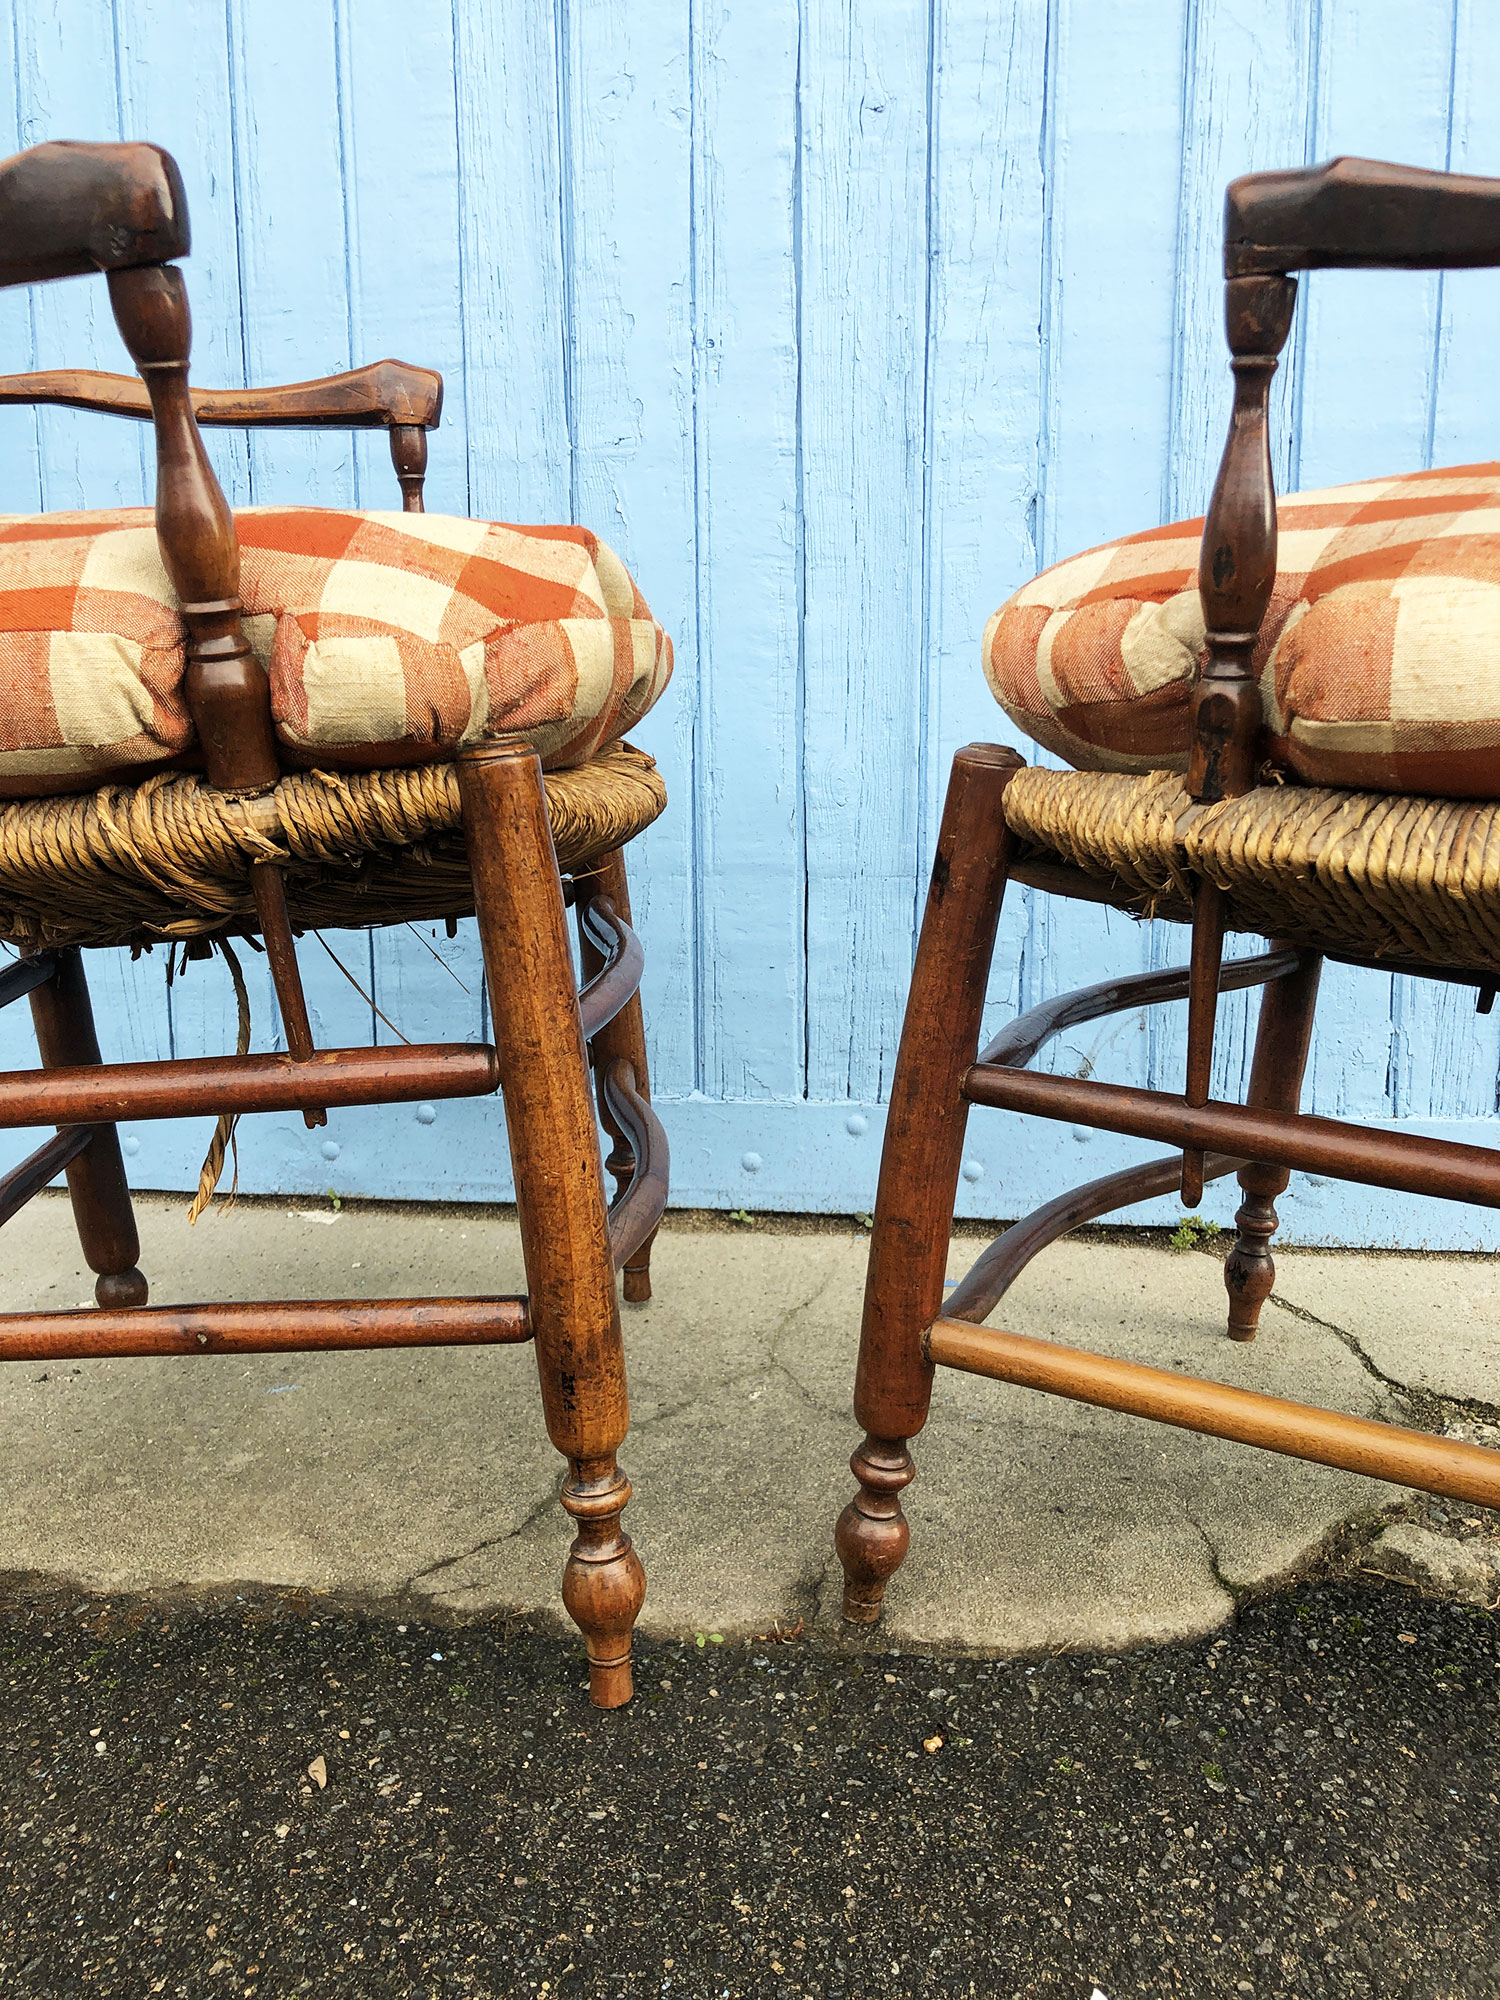 Pair of Provençal Armchairs, Late 18th / Early 19th Century